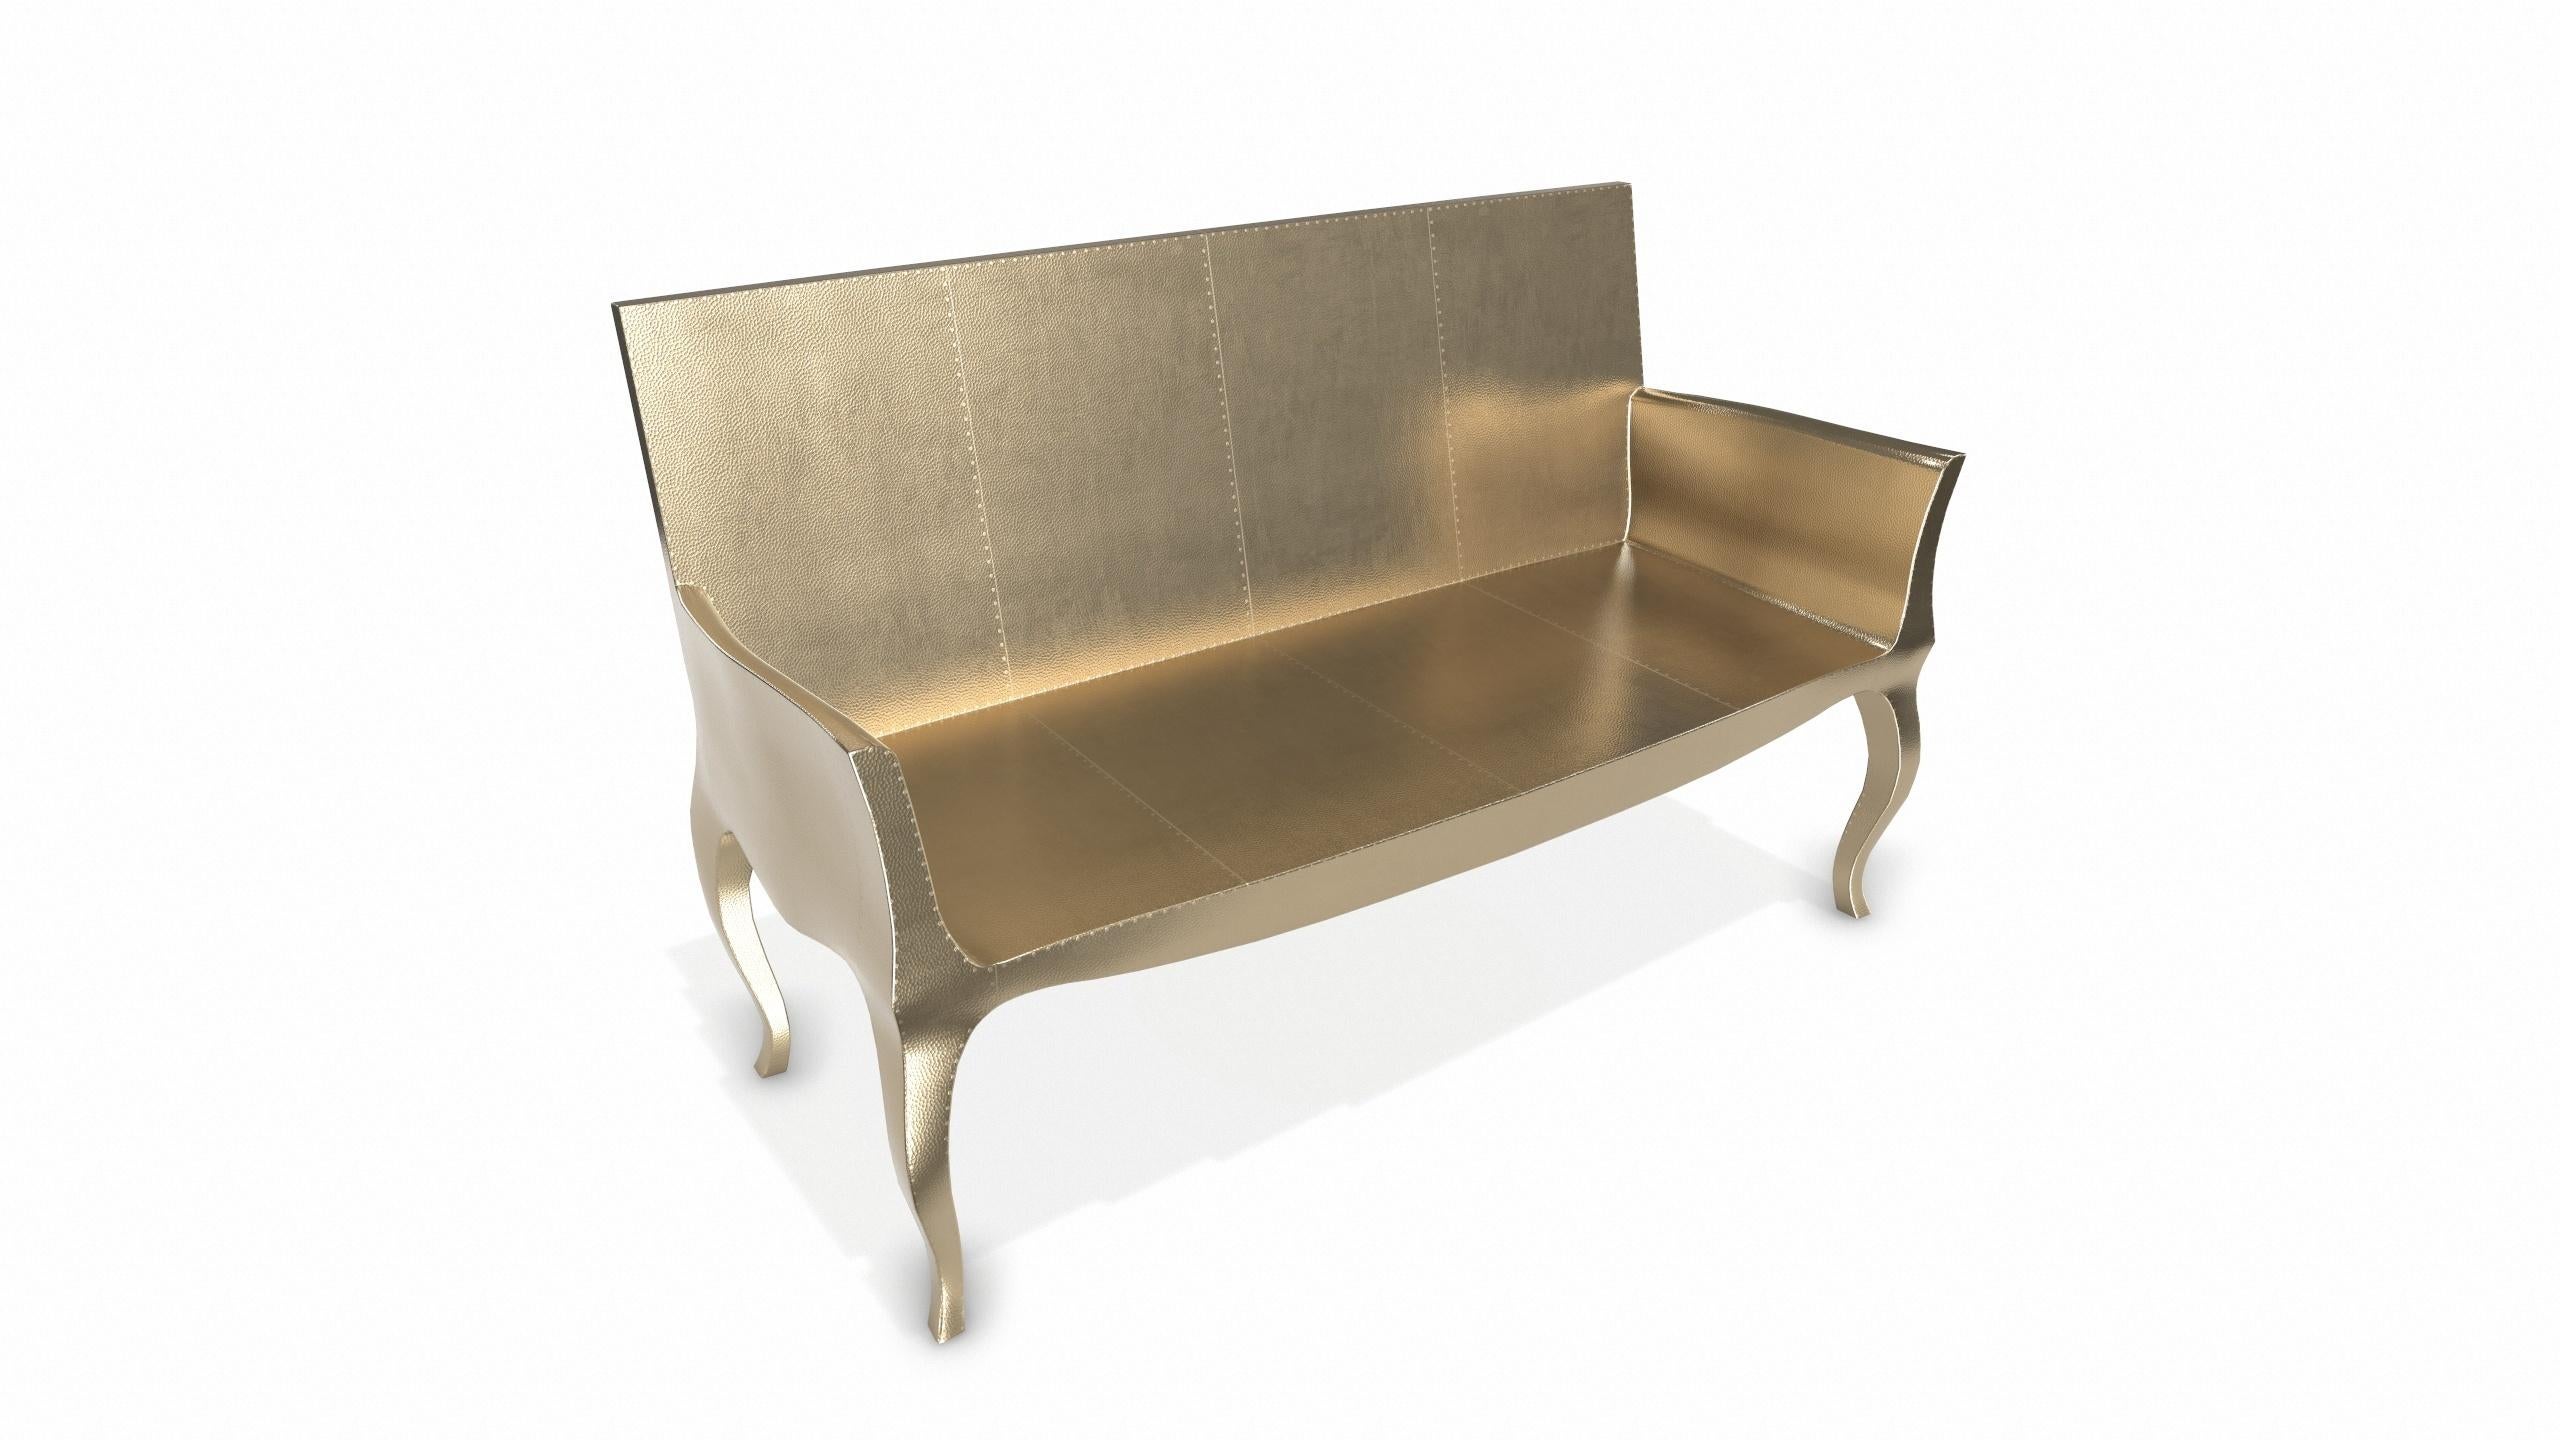 Louise Settee Art Deco Chaise Longues in Mid. Hammered Brass by Paul Mathieu For Sale 2